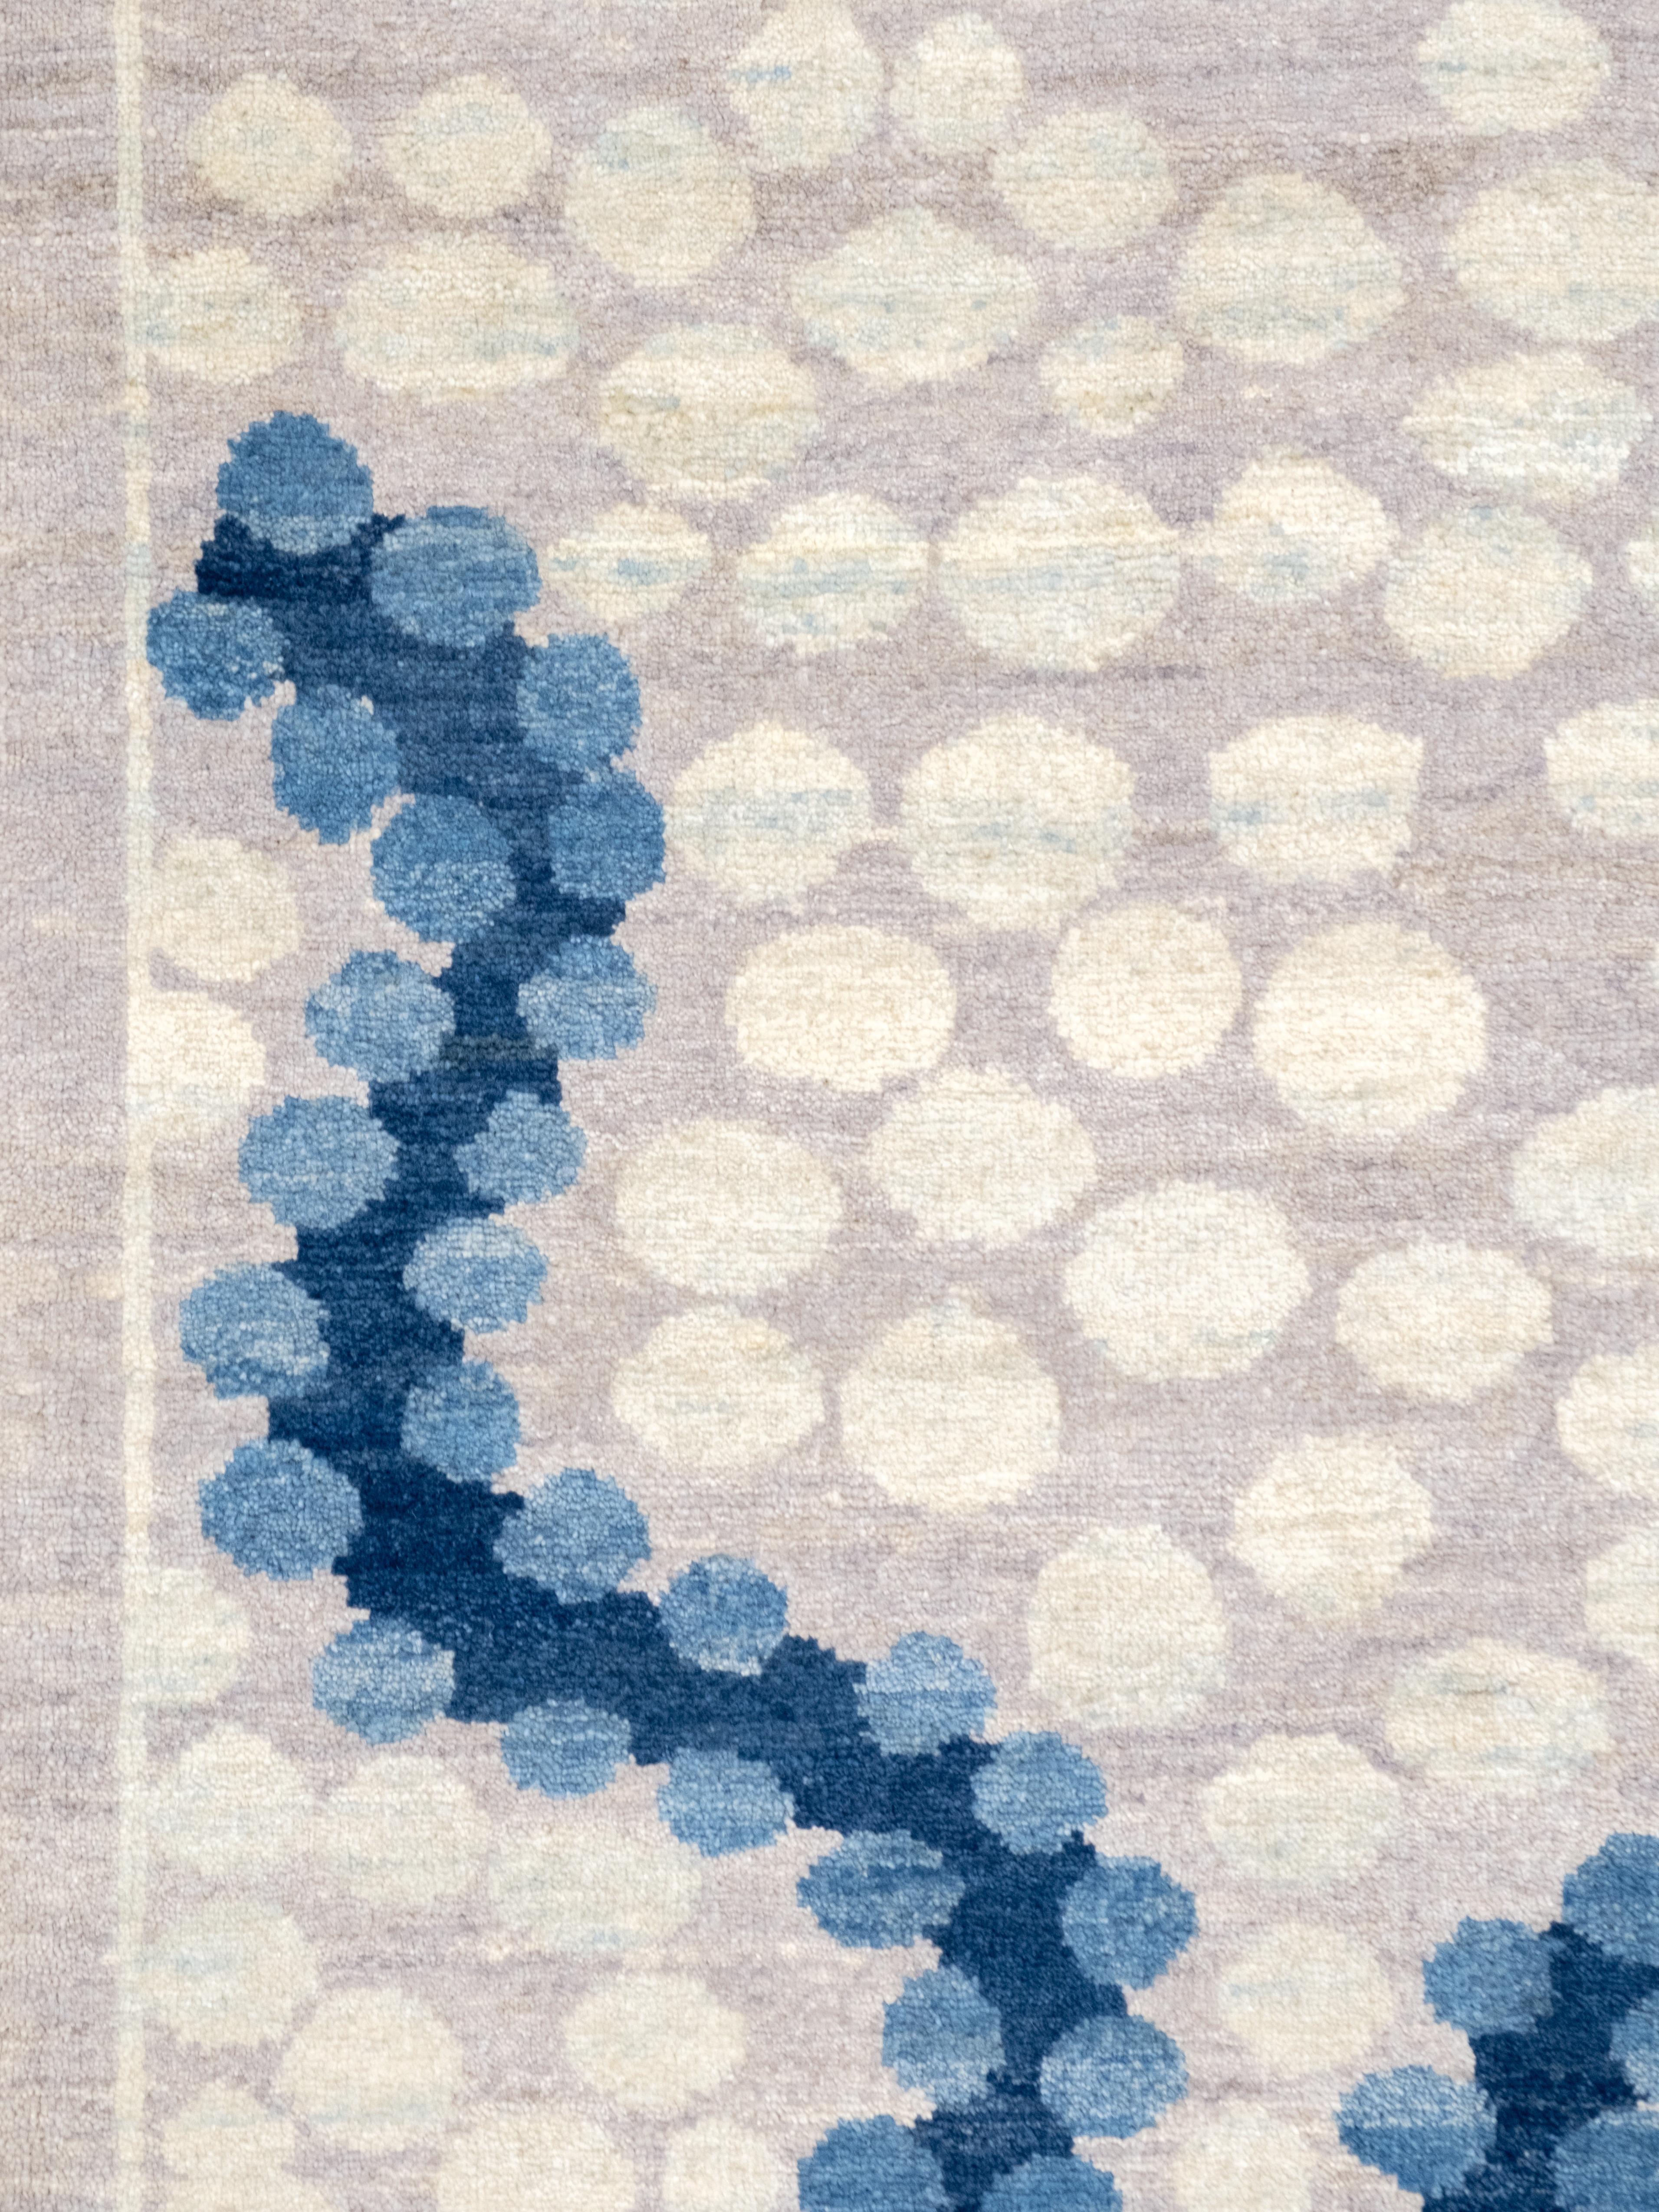 Blue and Cream Wool Modern Persian Carpet, Hand-Knotted, 8' x 10' For Sale 1